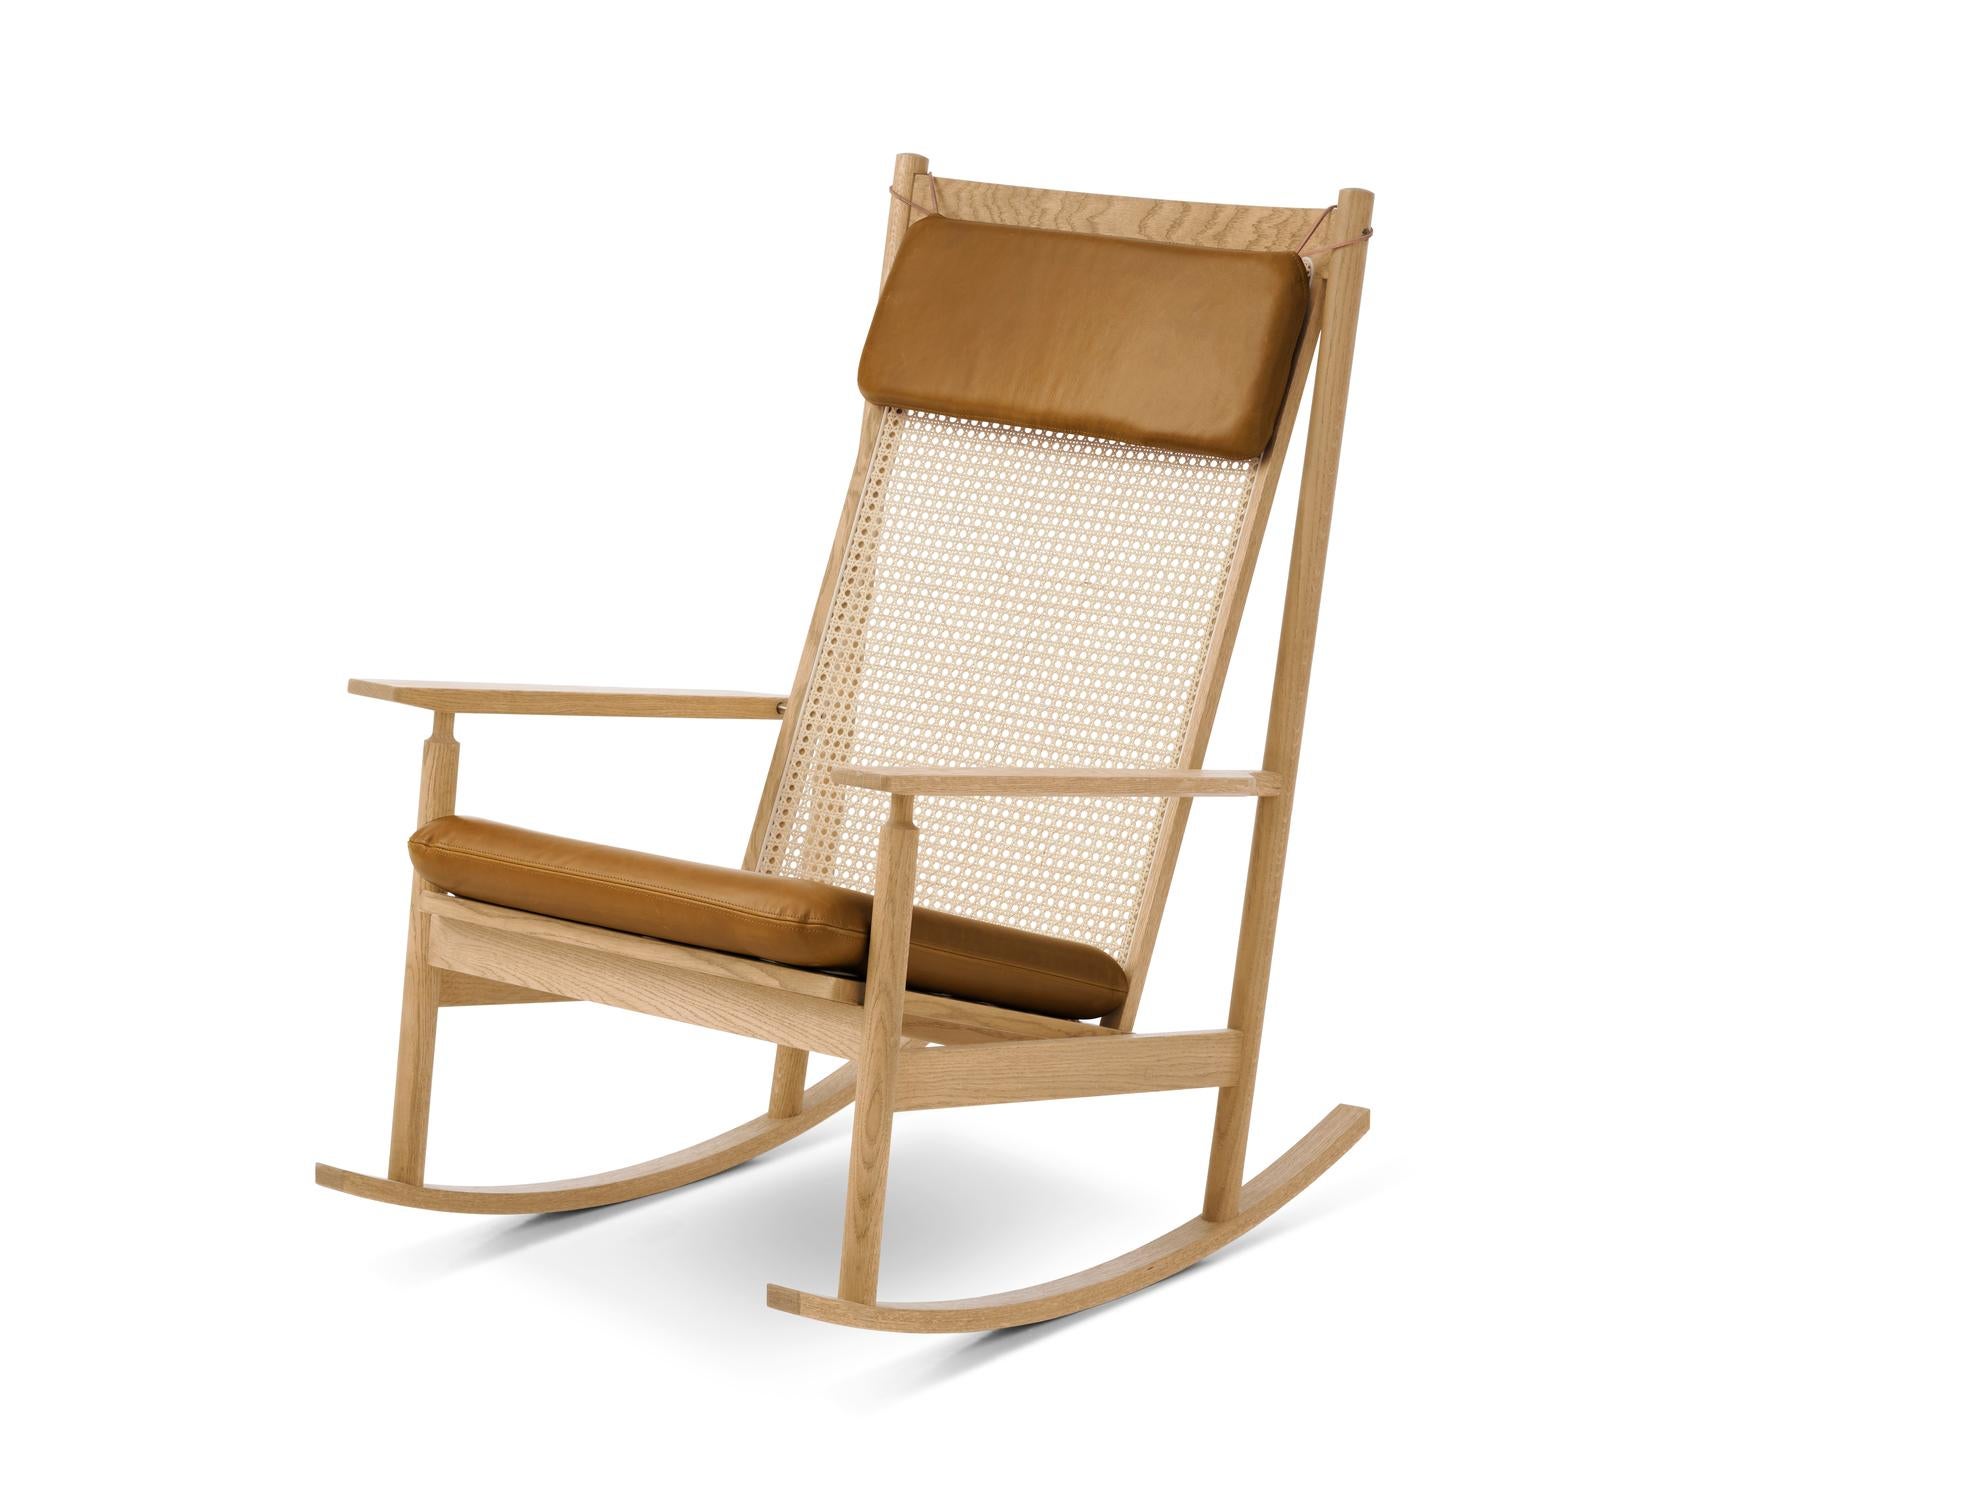 Swing Rocking chair Nevada Oak Cognac by Warm Nordic
Dimensions: D91 x W68 x H 103 cm
Material: Wood, Foam, Rubber springs, French cane, Textile or leather upholstery, Oak
Weight: 16.5 kg
Also available in different colours, materials and finishes.